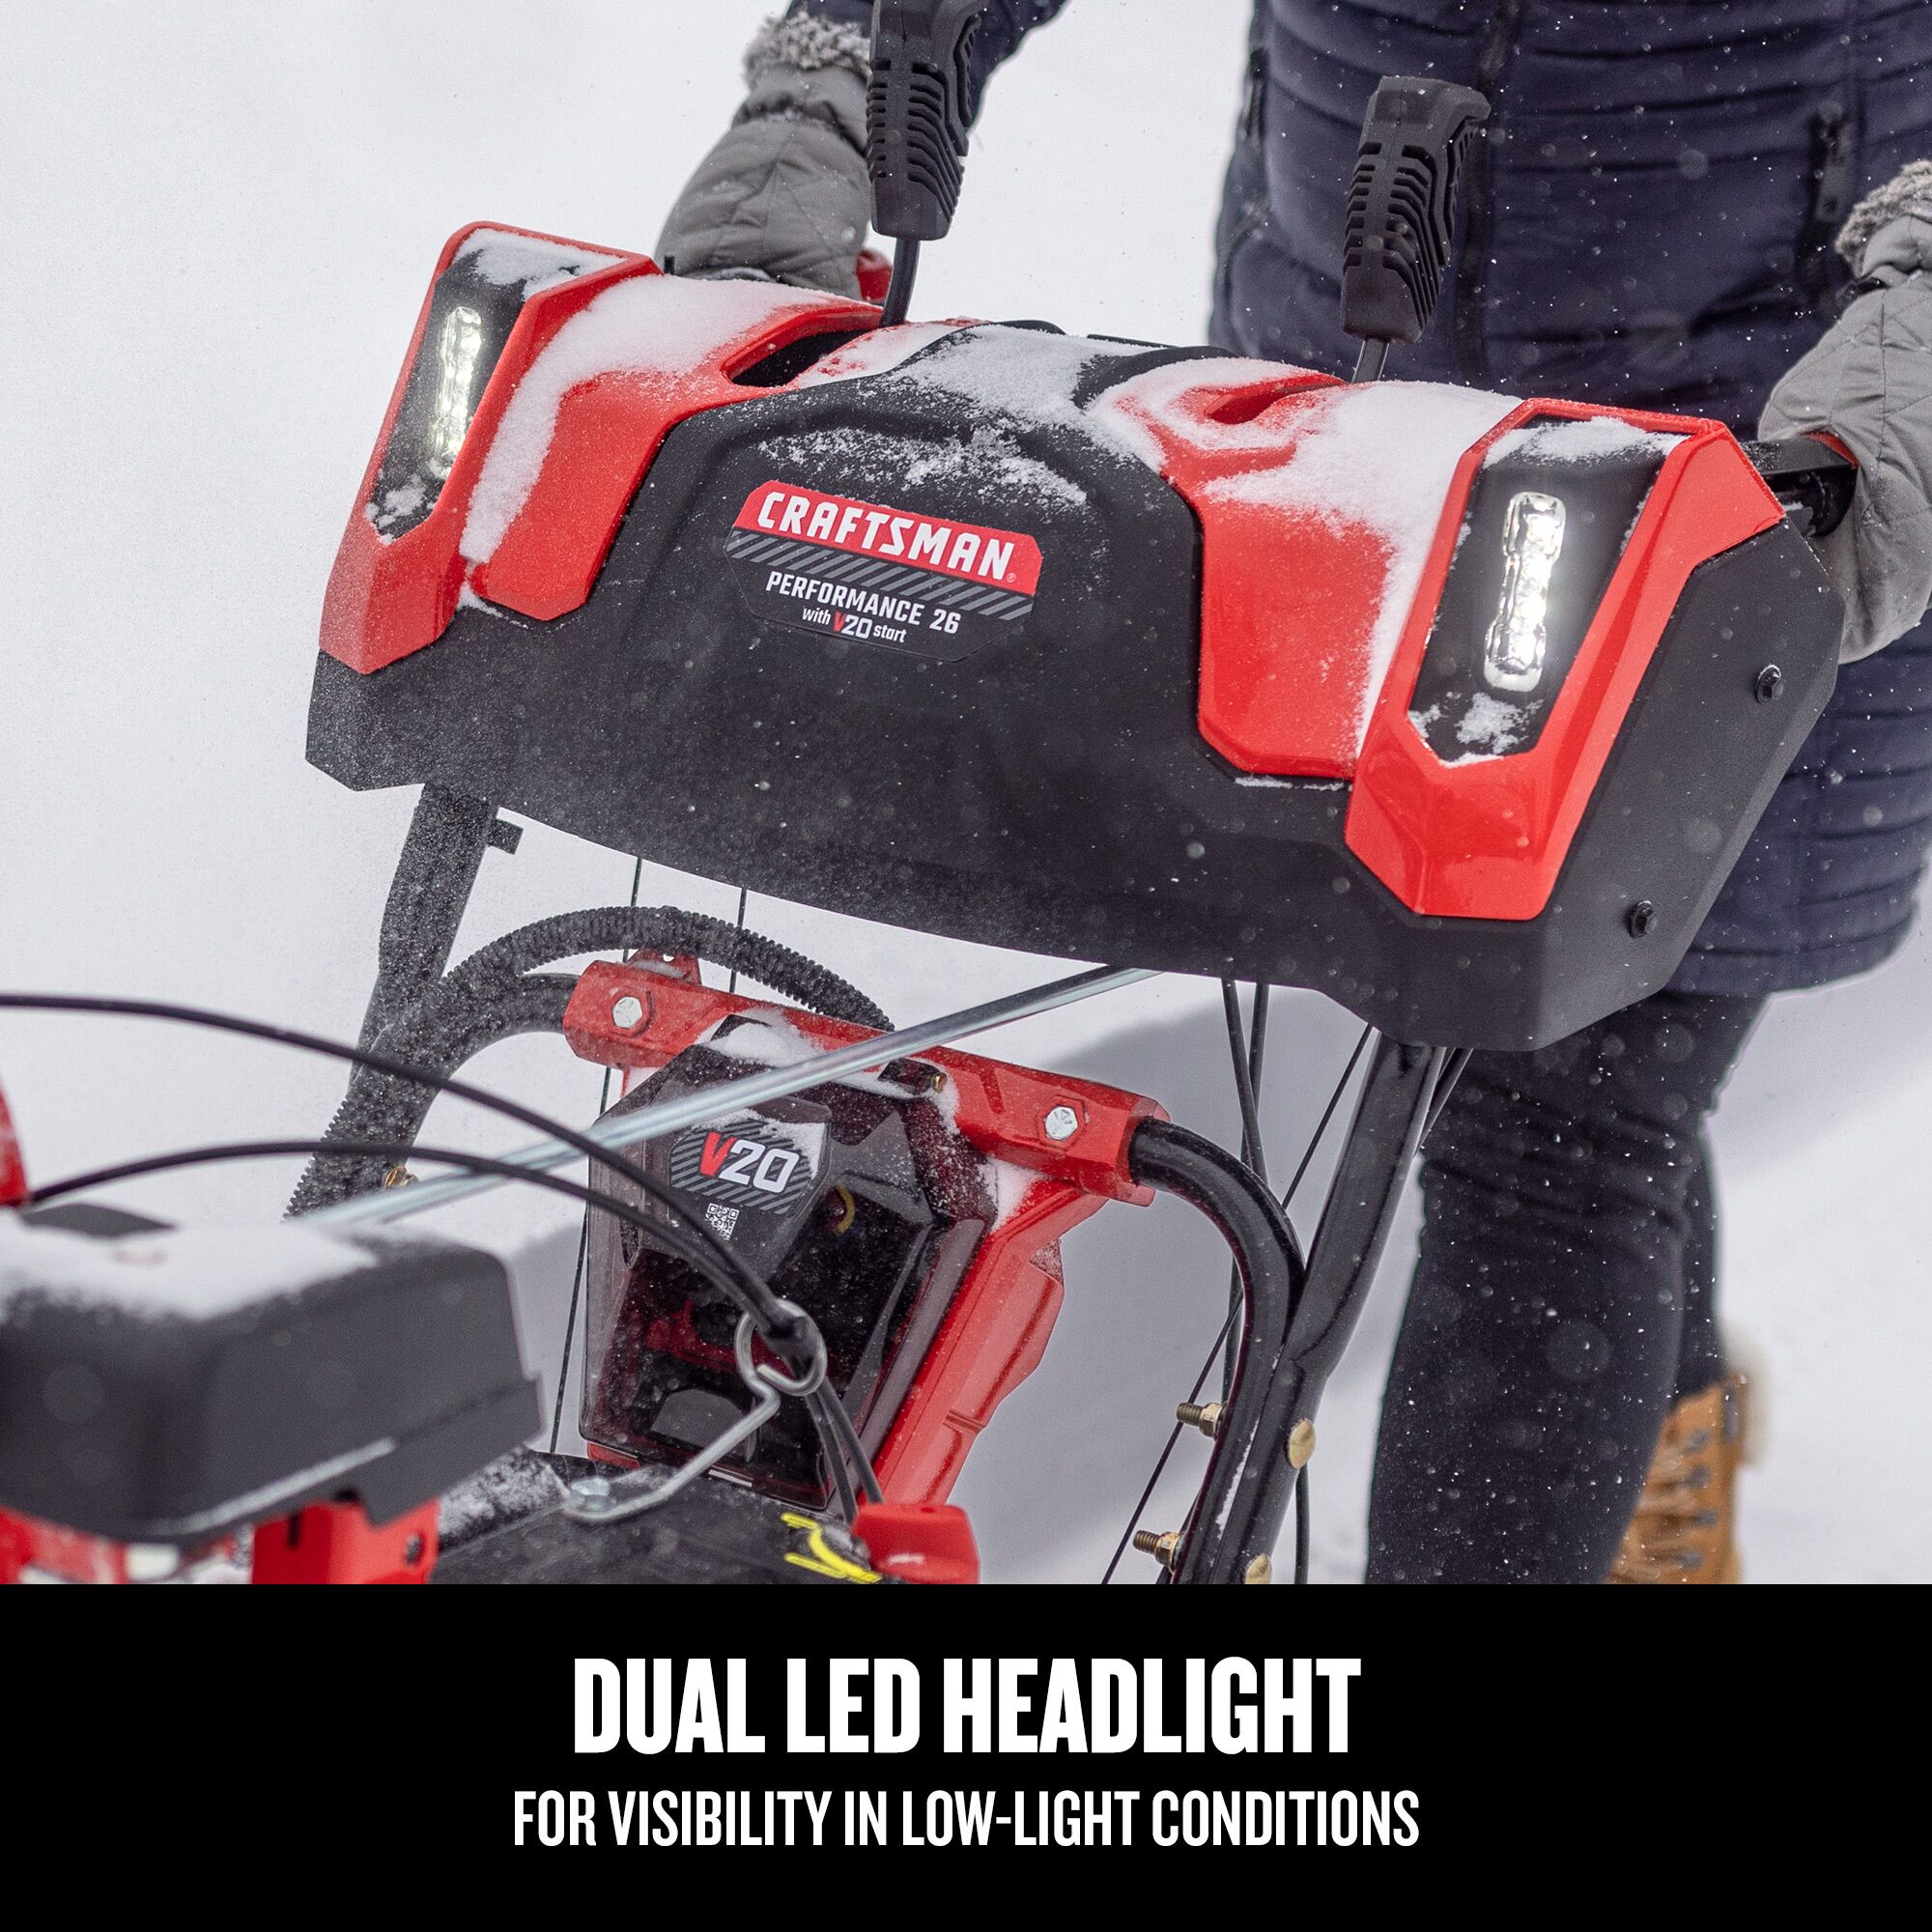 CRAFTSMAN V20* Start 26-in. 243-cc Two Stage Gas Snow Blower focused in on dual led headlight